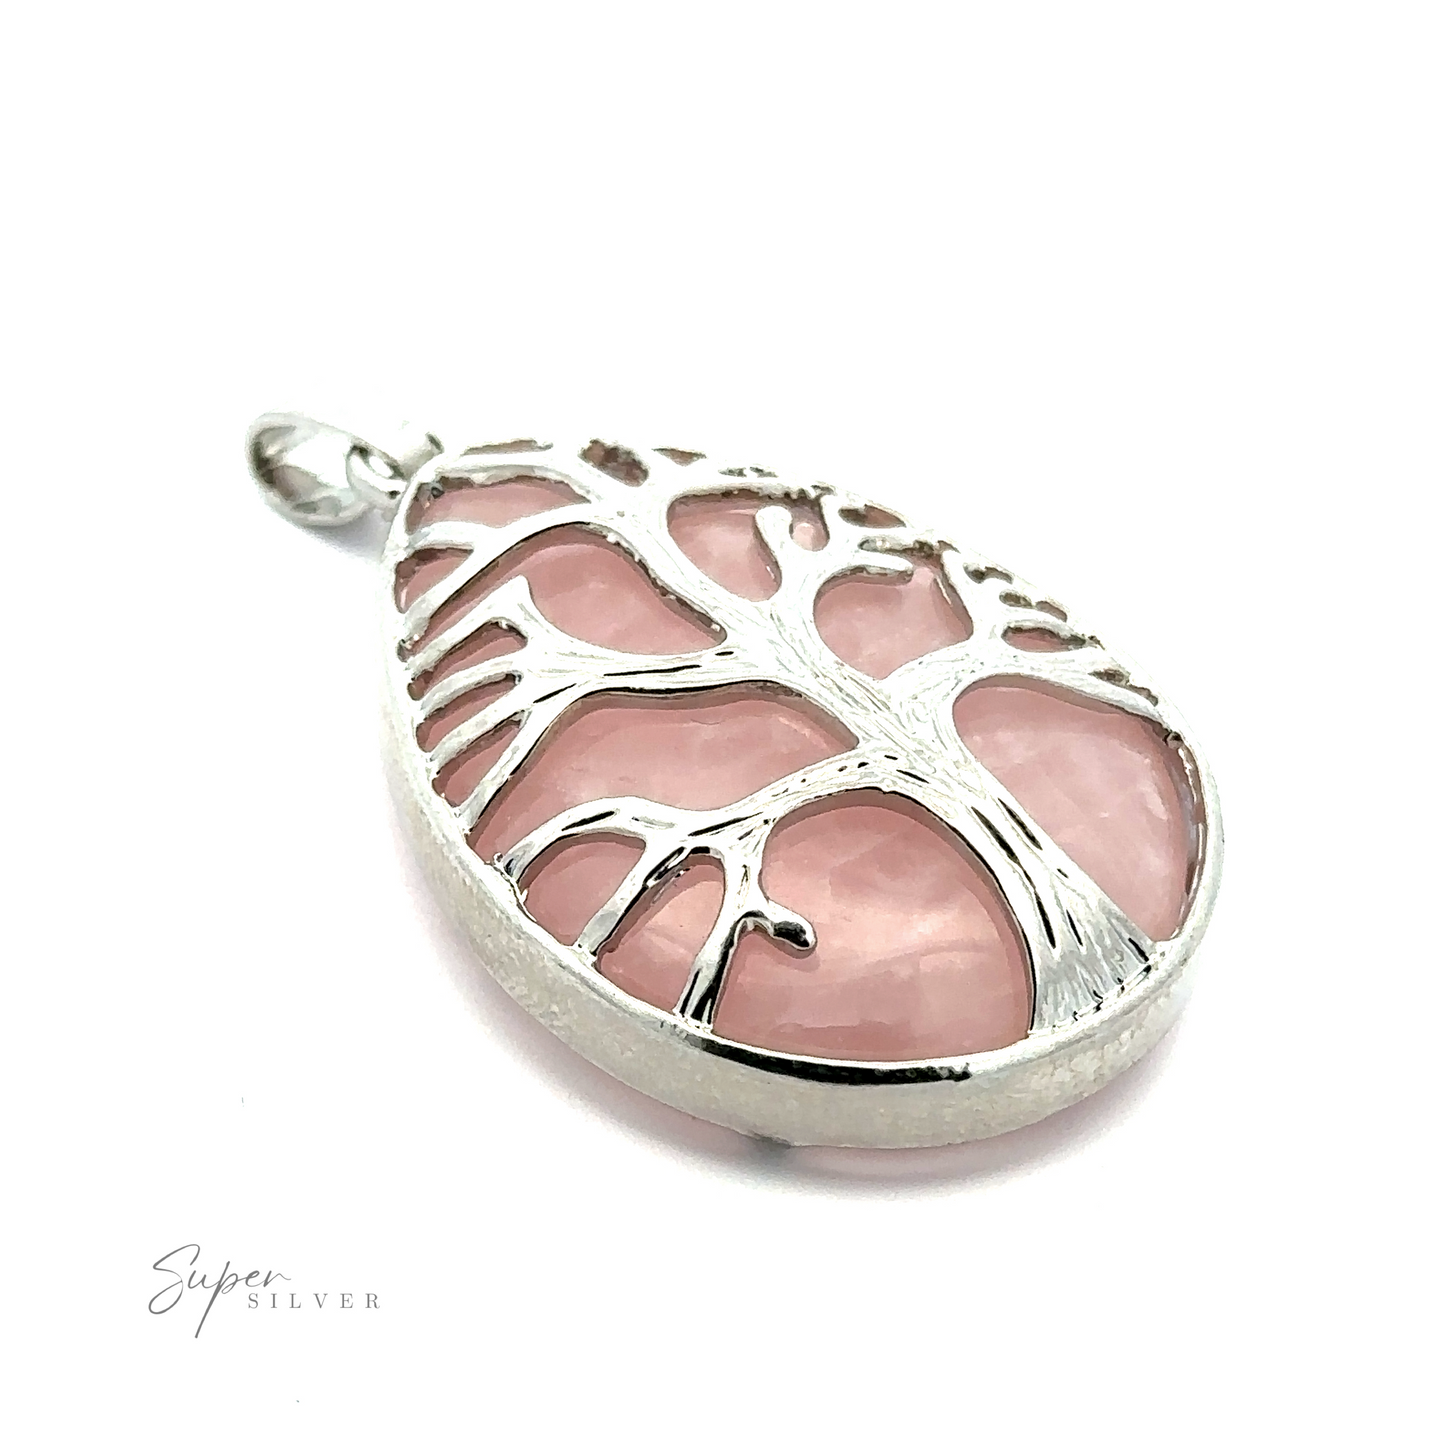 A Teardrop Shape Stone with Silver Plated Tree Of Life Pendant in the shape of a tree with pink stone infill, placed on a white background. The inscription "Super Silver" is visible at the bottom left corner.